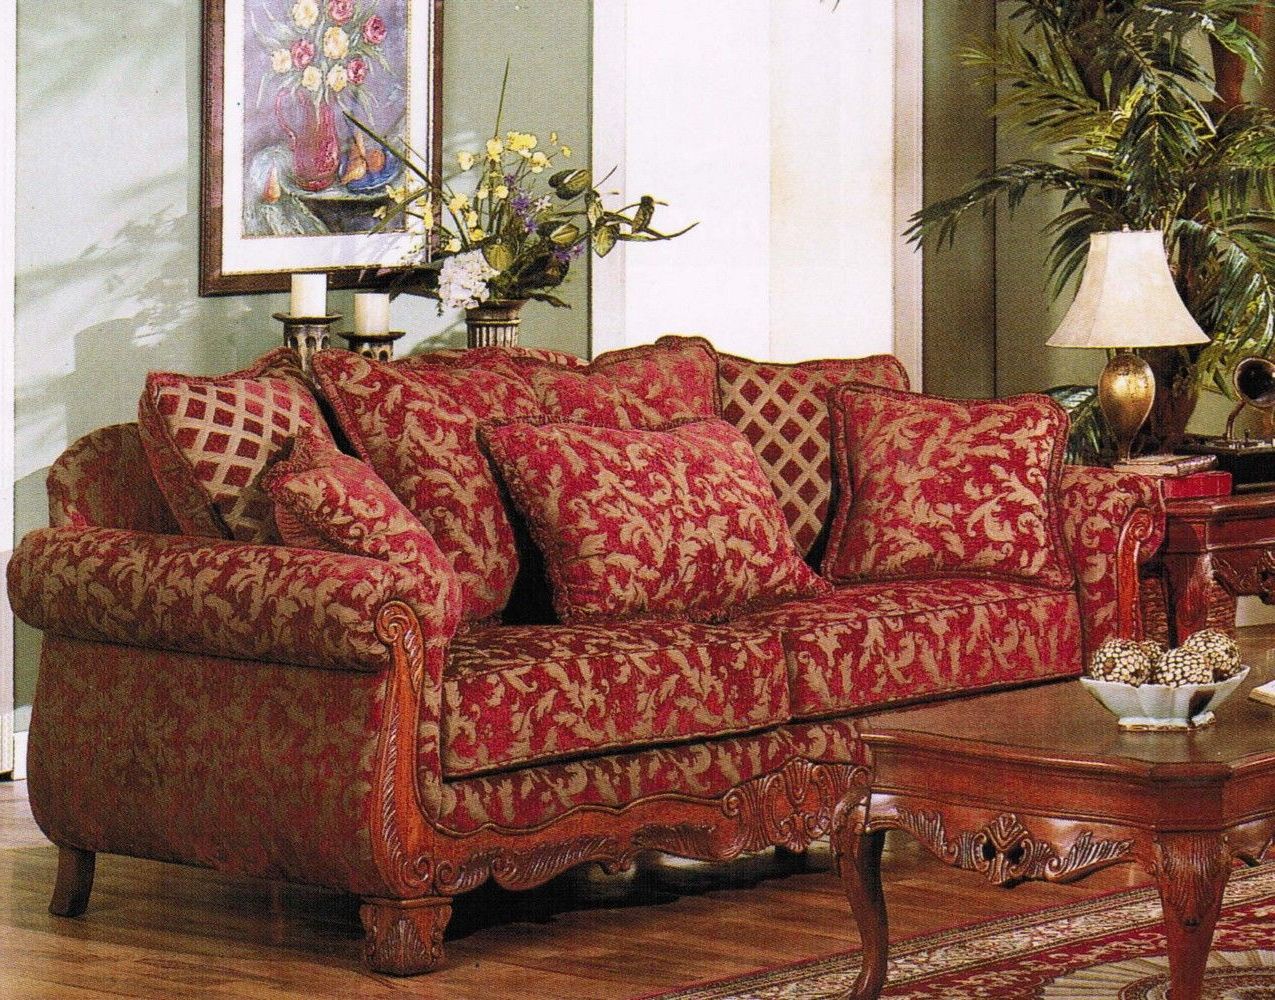 Visiondecor | Printed Sofa, Red Sofa Living Room, Living Room Sofa Within Sofas In Pattern (View 2 of 20)